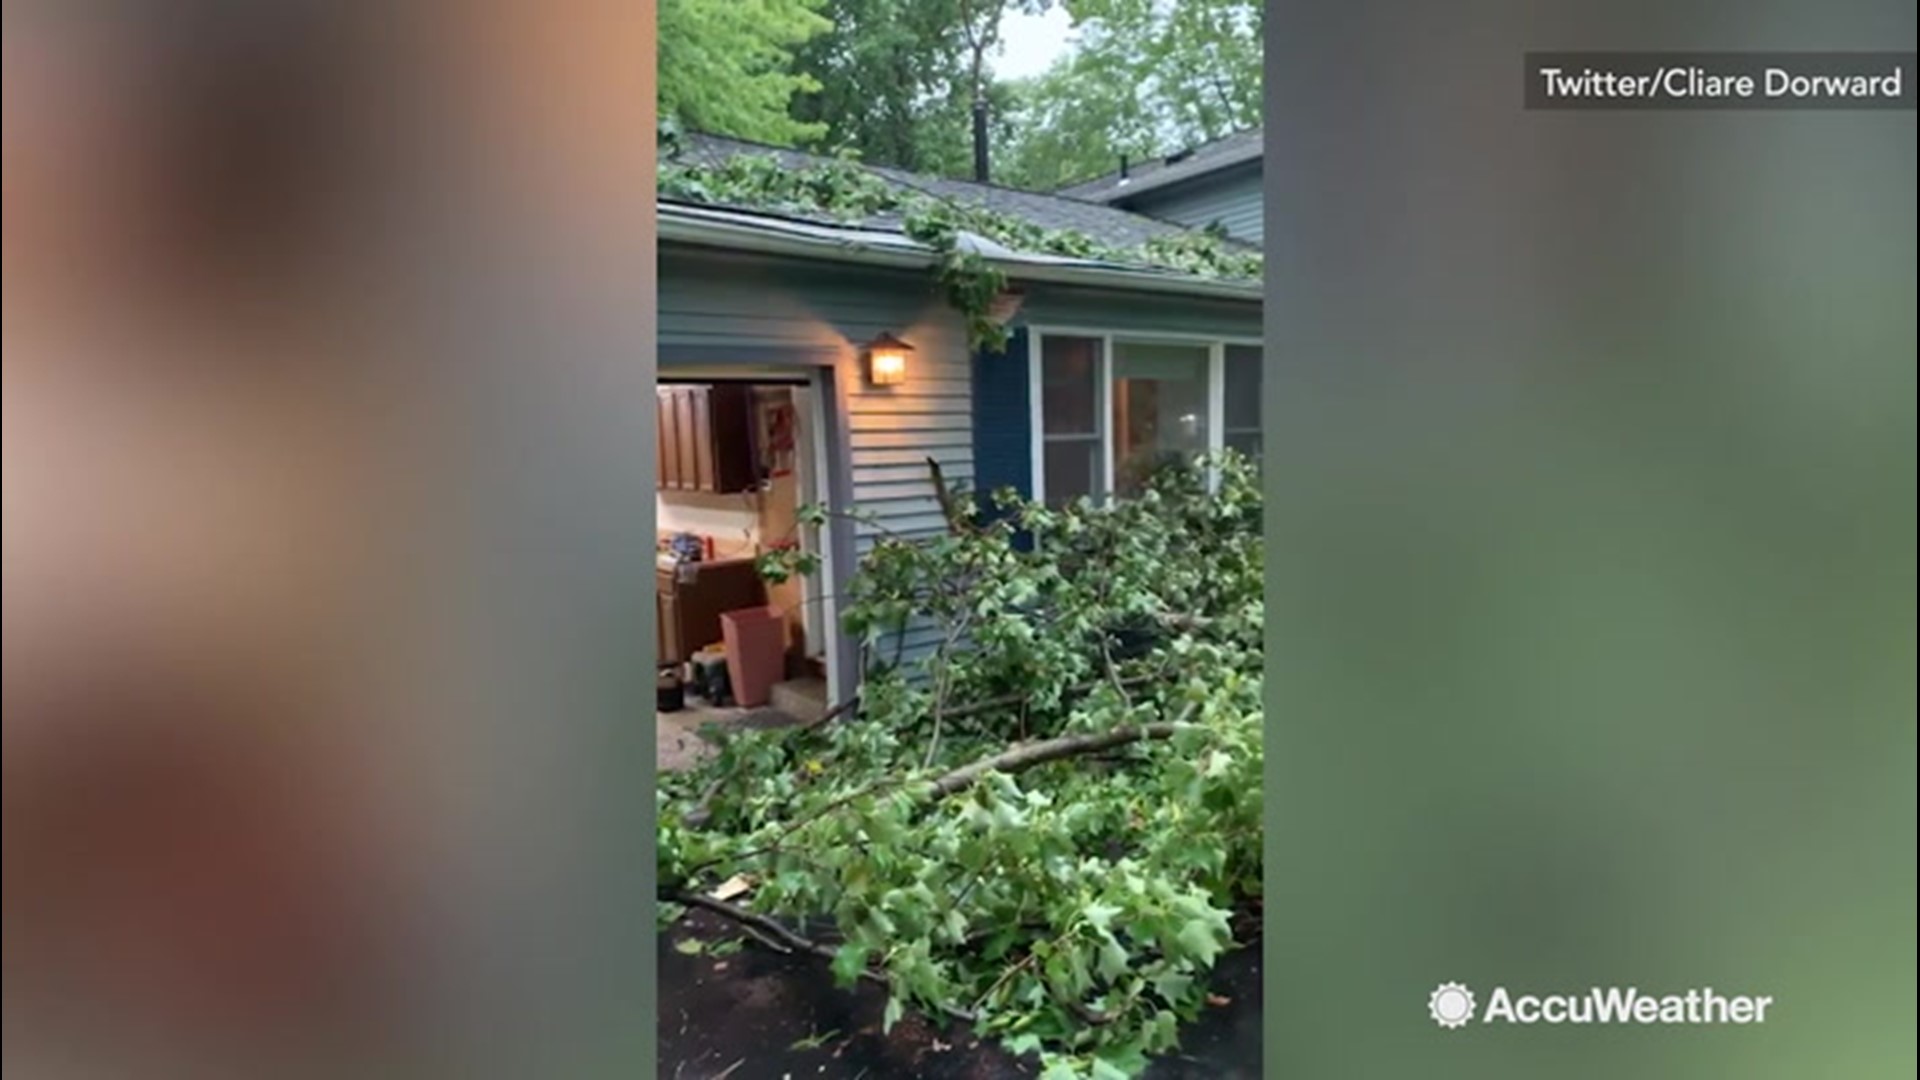 A couple of unfortunate homeowners in Reston and Woodbridge, Virginia came outside on July 17 to find their lawns, backyards, and houses covered in debris from foliage that had been battered in the storm.